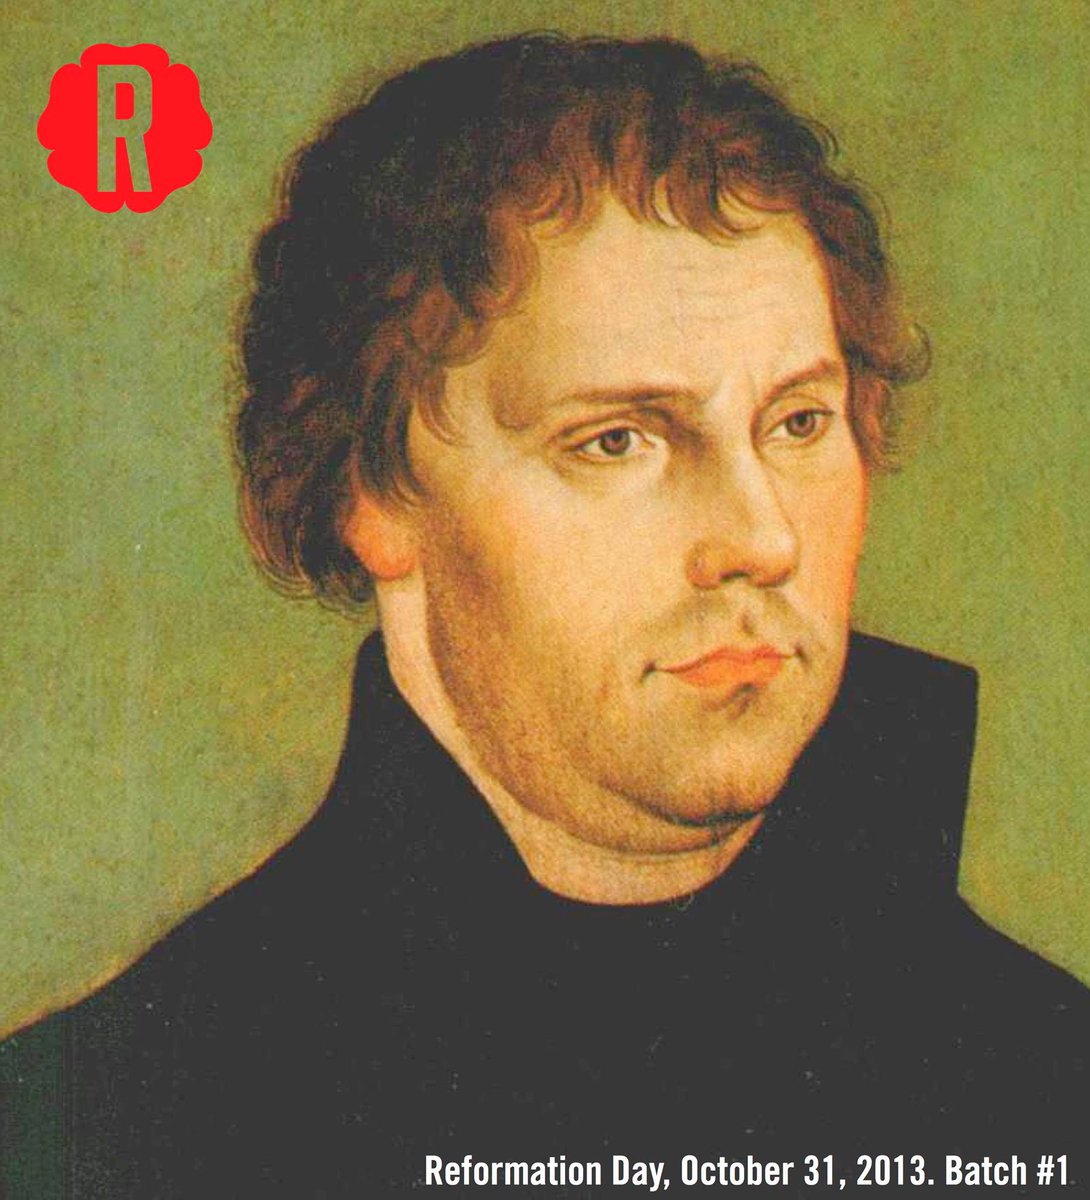 To 6 years of setting beer free and to 502 years of pissing off religious and secular elites. Happy Reformation Day and Happy Halloween, cheers! #setbeerfree #northgeorgiamade #reformationday #martinluther #semperreformanda